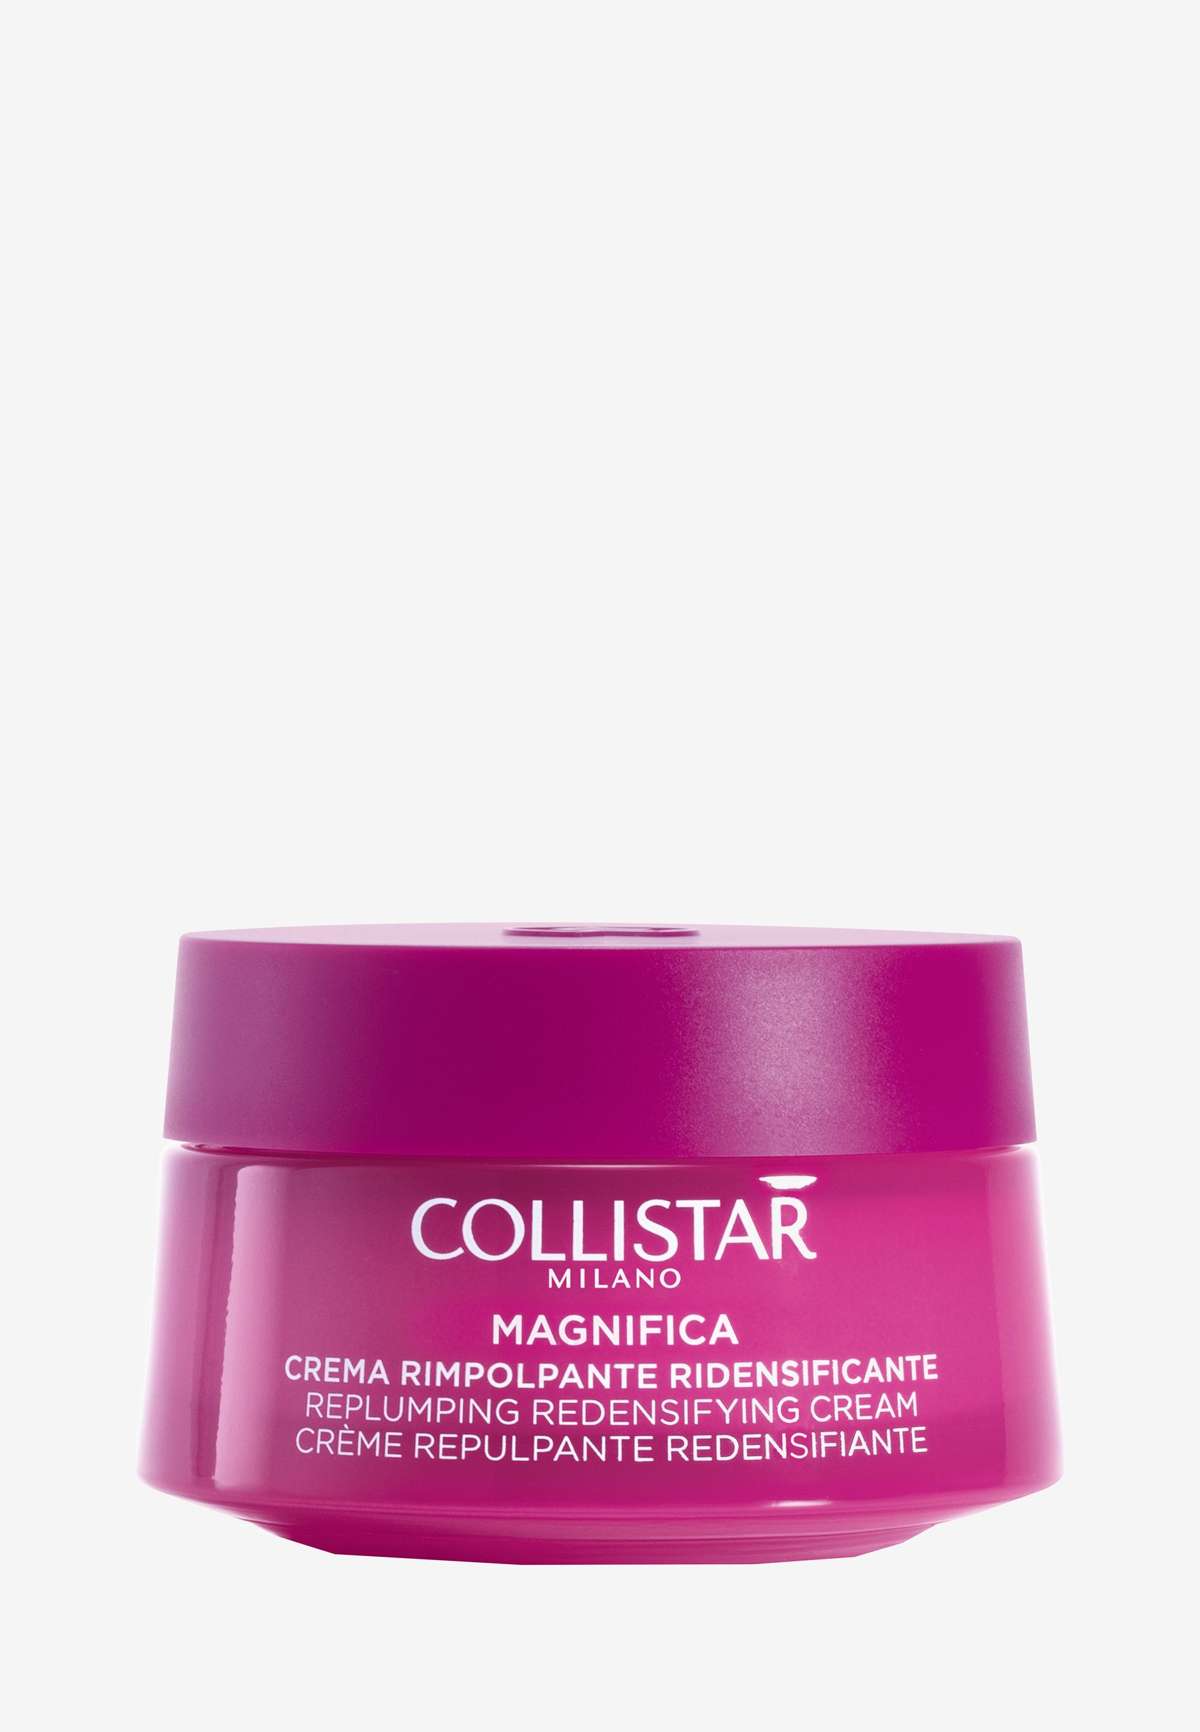 MAGNIFICA REPLUMPING REDENSIFYING CREAM FACE AND NECK - Anti-Aging